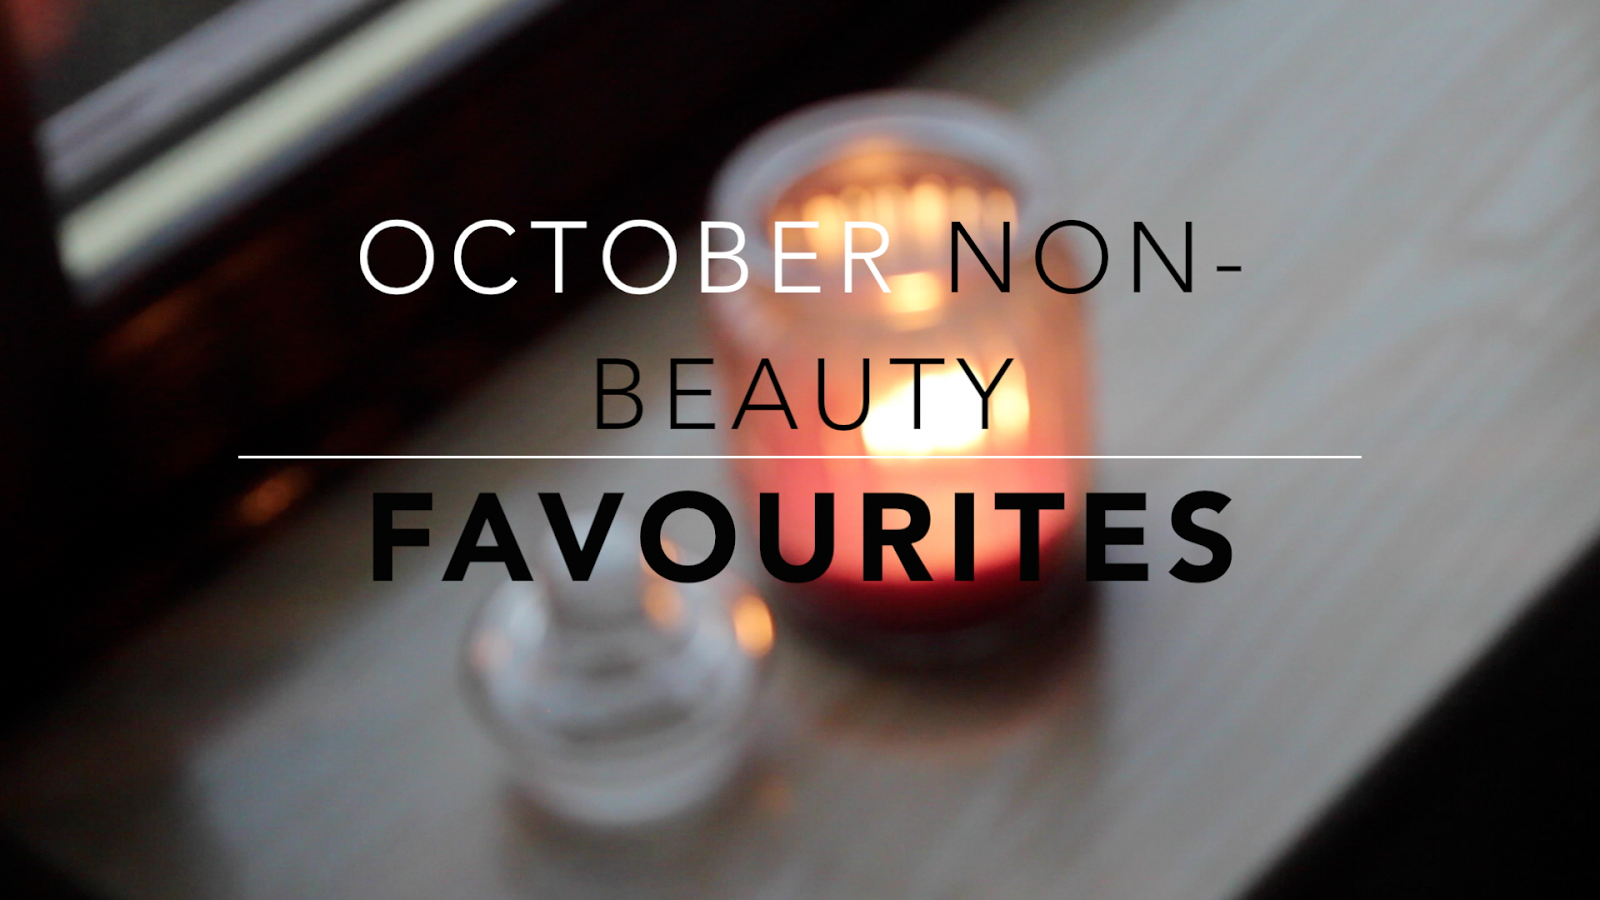 October (Non-Beauty) Favourites!